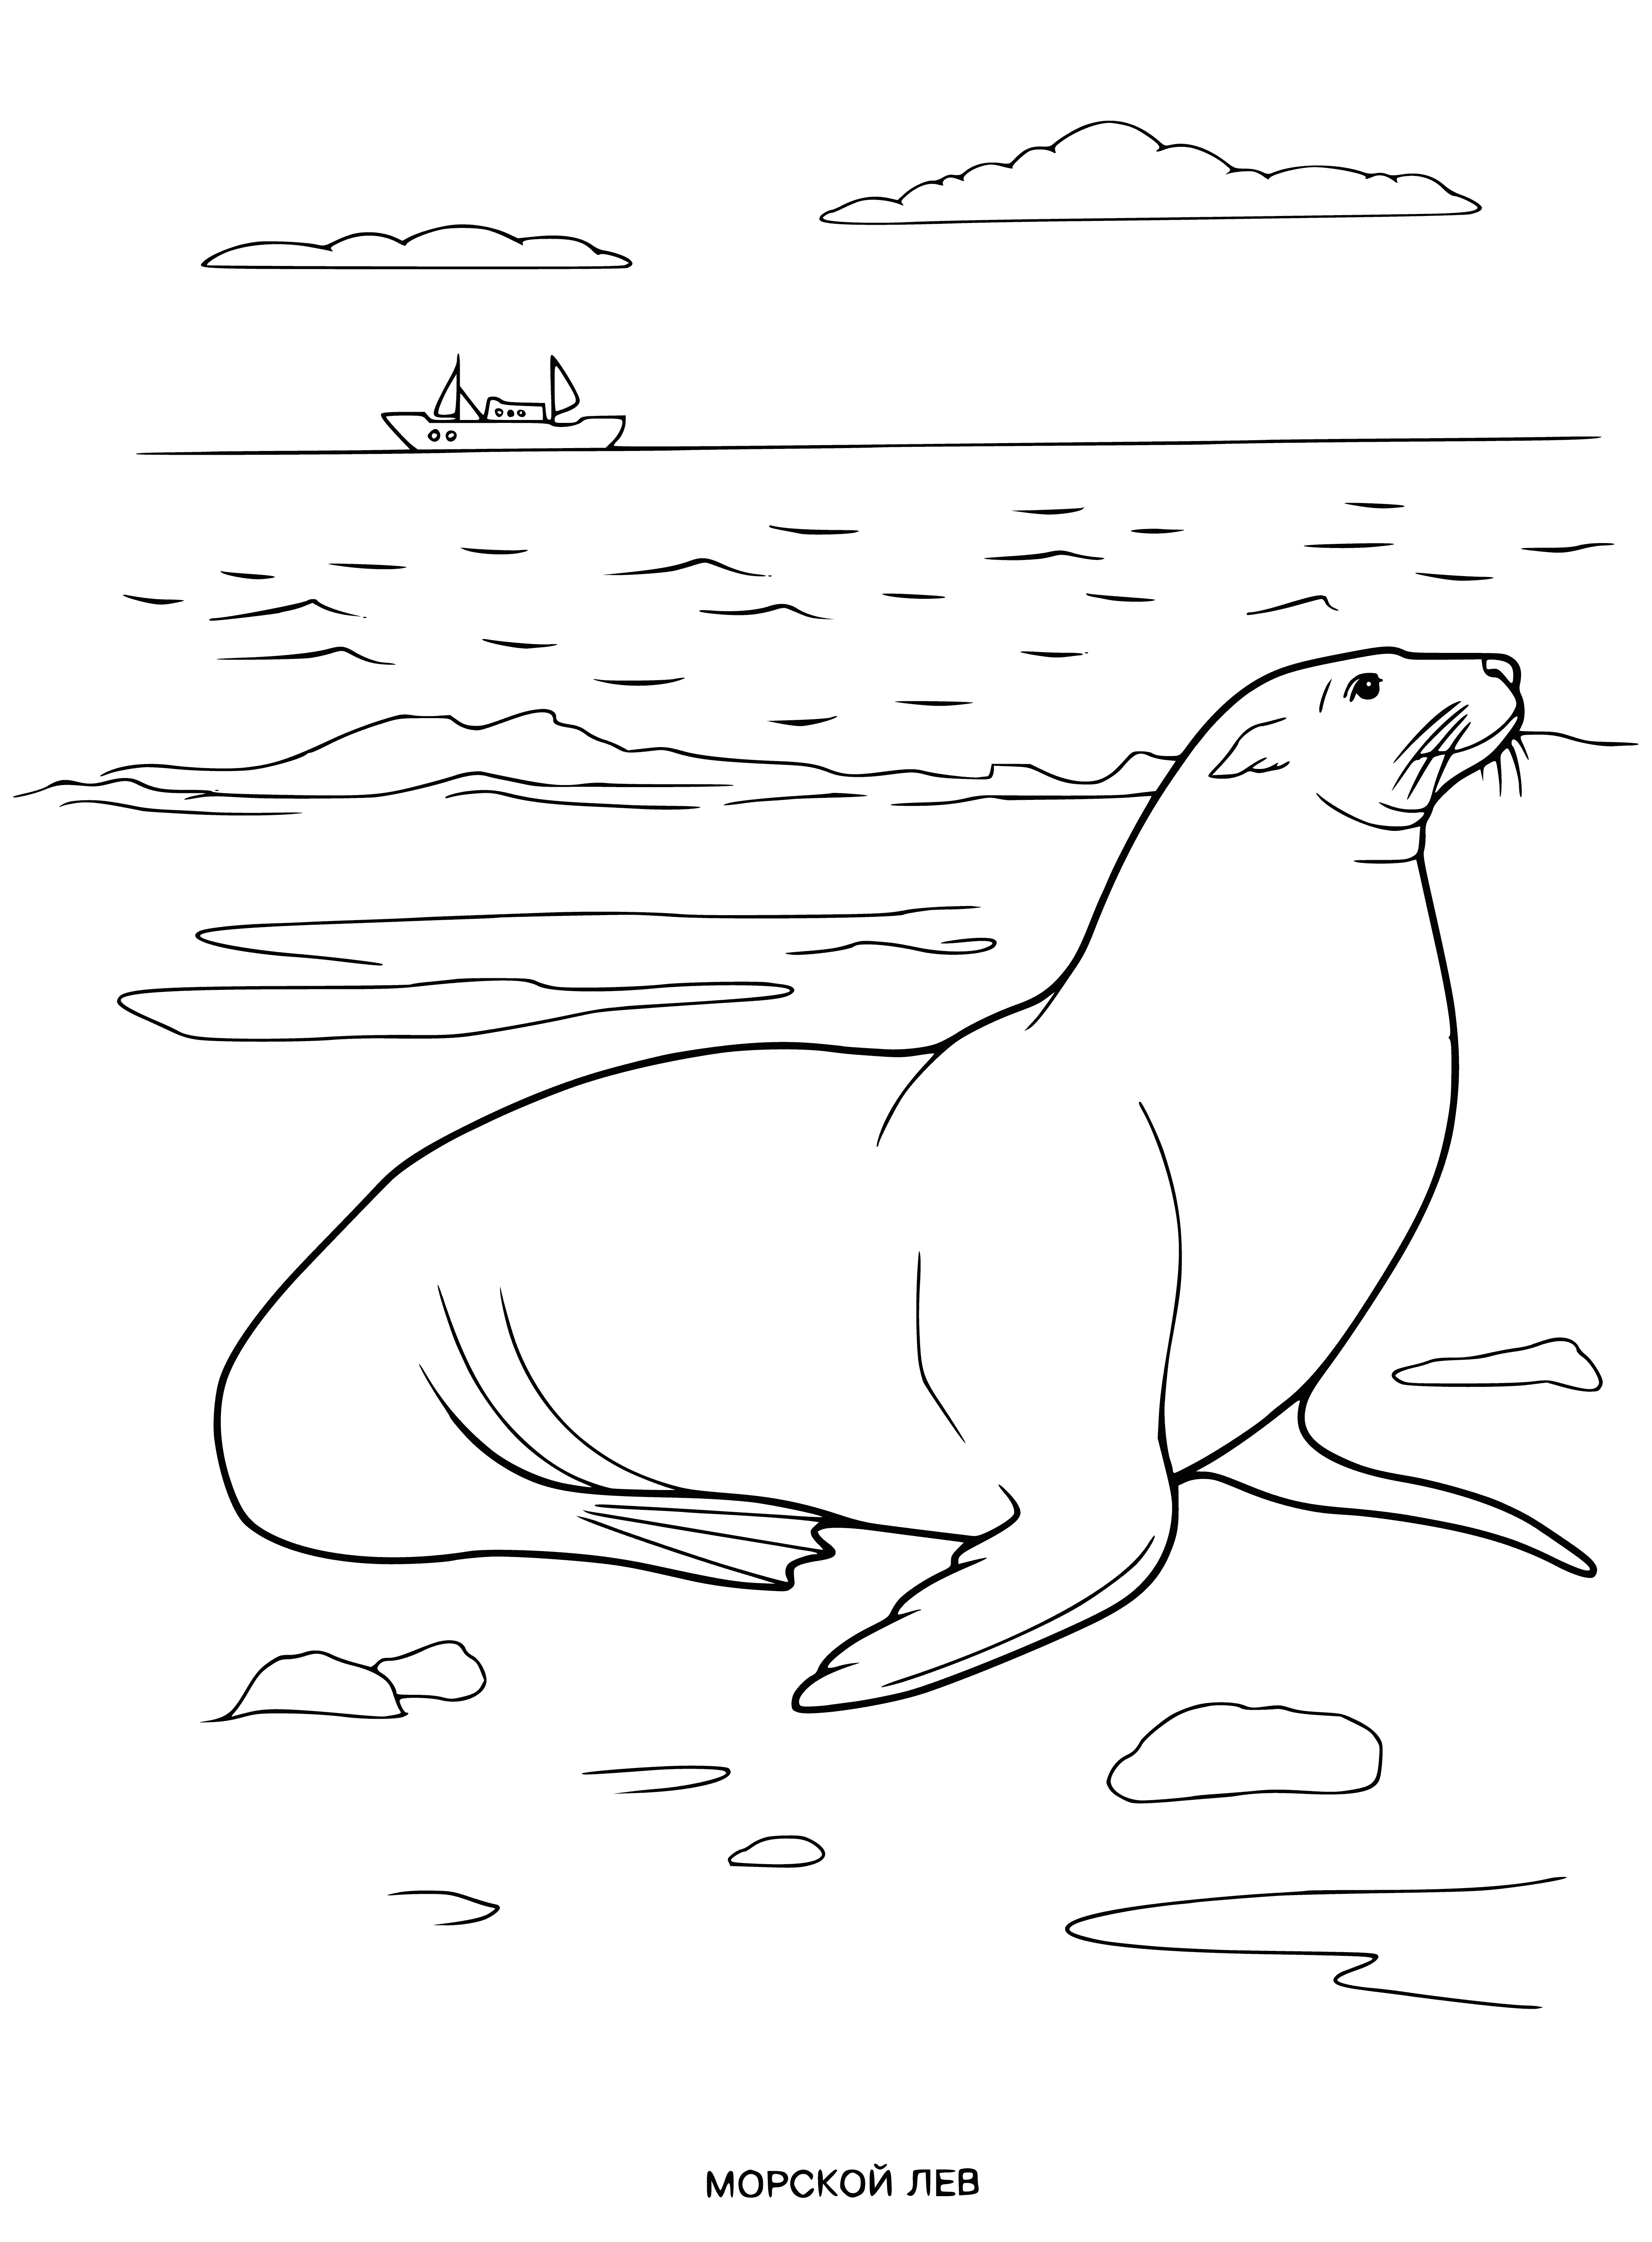 coloring page: Large animal in water - long body & tail, light brown fur, small head, big eyes, long nose, wide mouth, big front & small back fins.